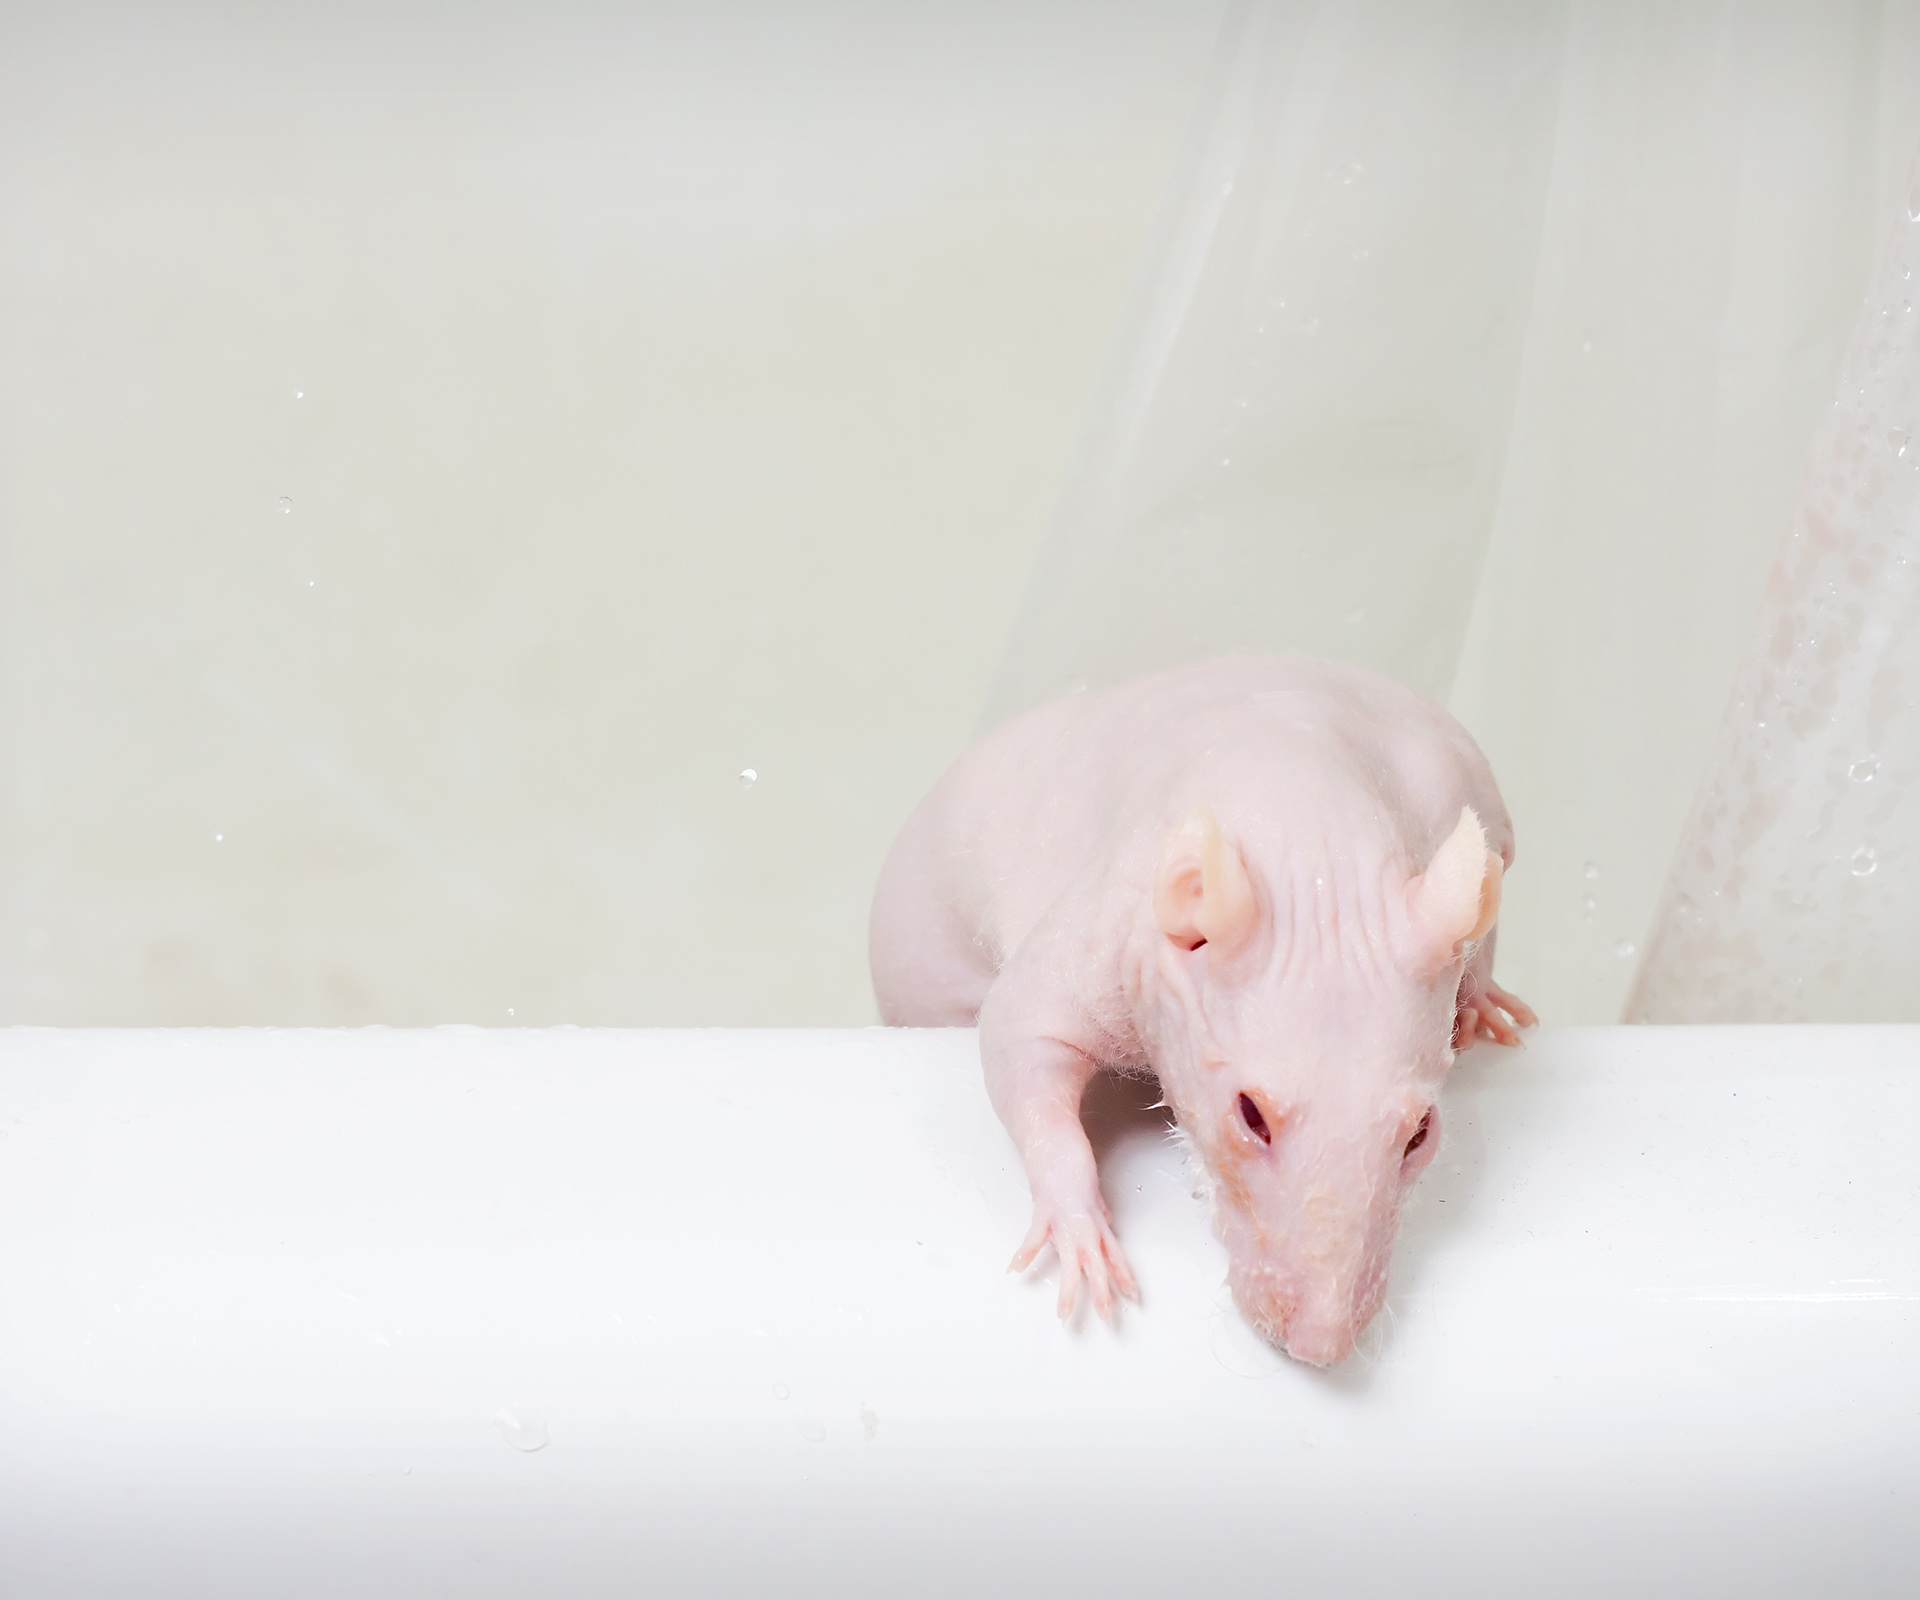 Can a rat crawl through your plumbing and end up in your toilet?